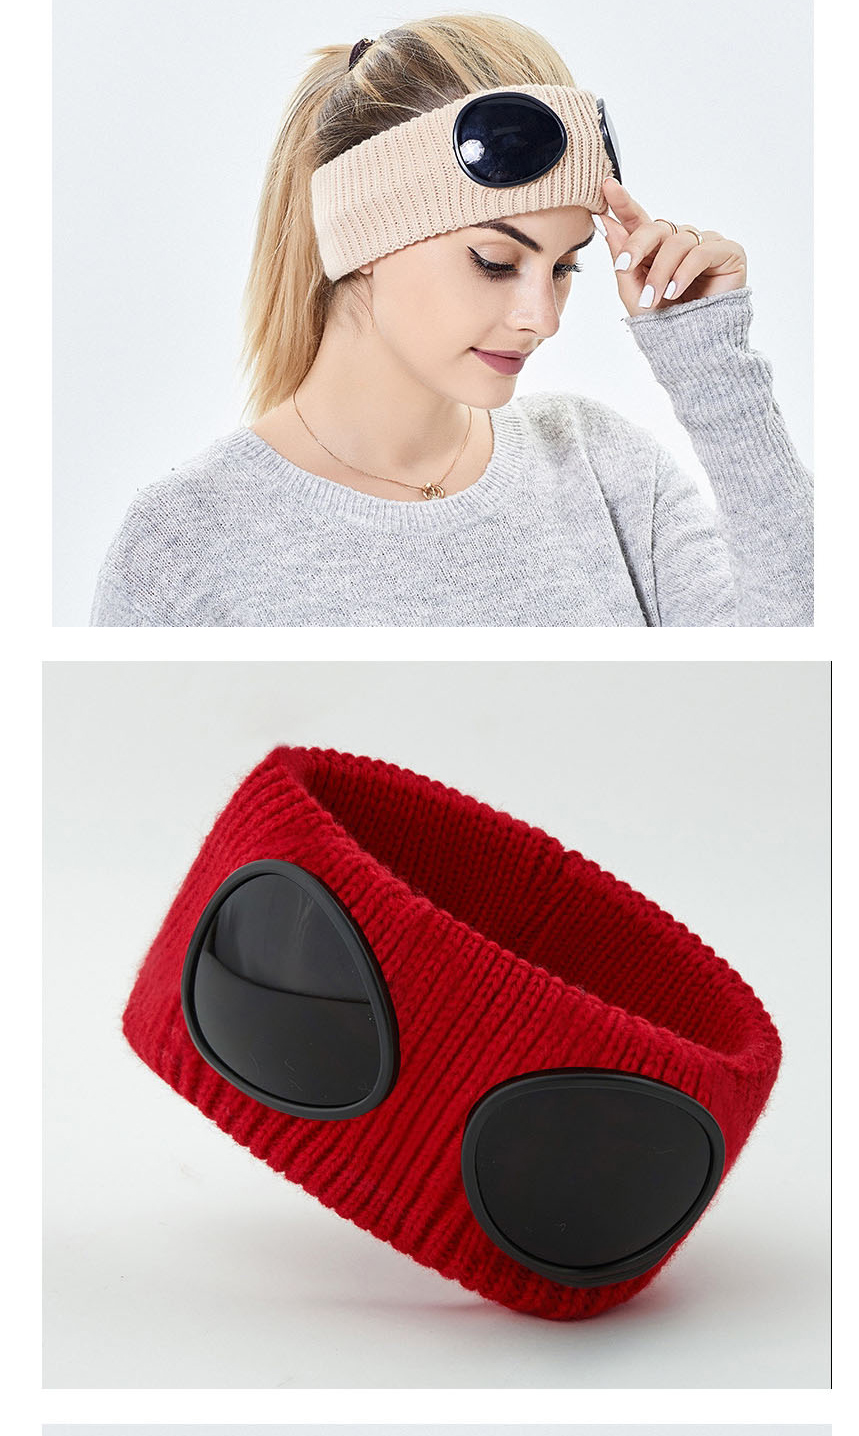 Fashion Red Wool Knitted Glasses Headband,Hair Ribbons